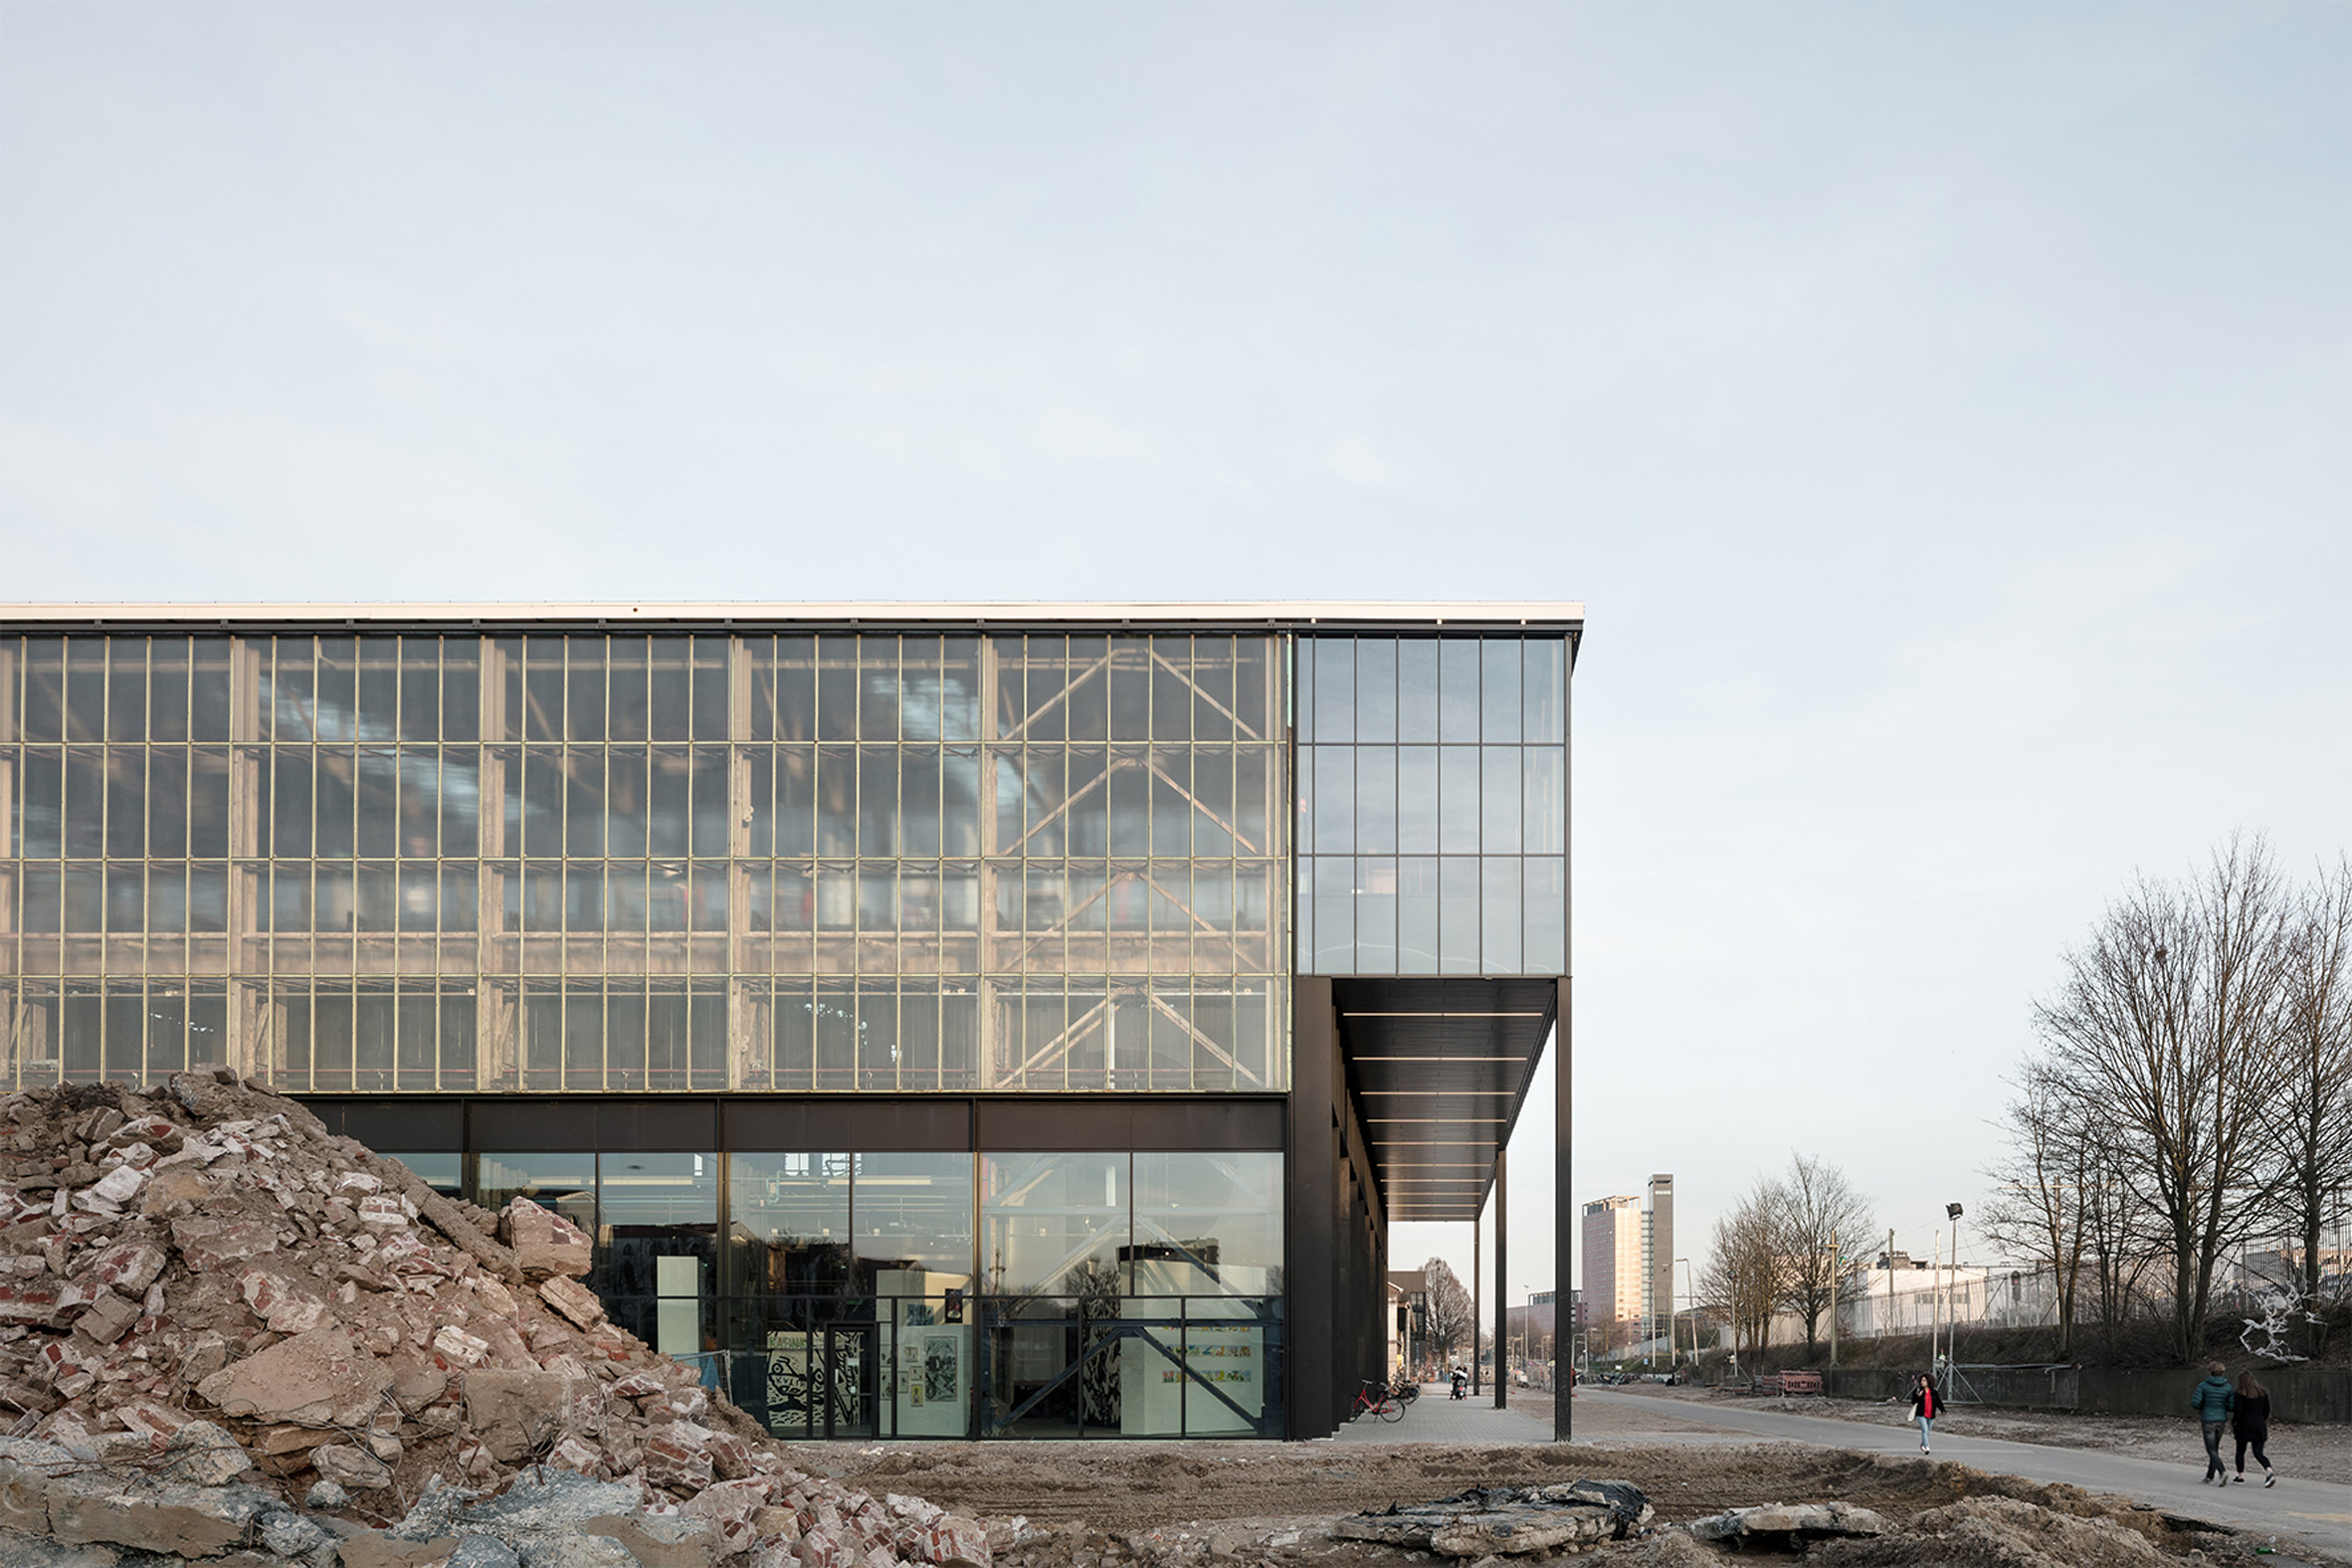 LocHal Public Library, by Civic Architects, Braaksma & Roos architectenbureau and Inside Outside/Petra Blaisse